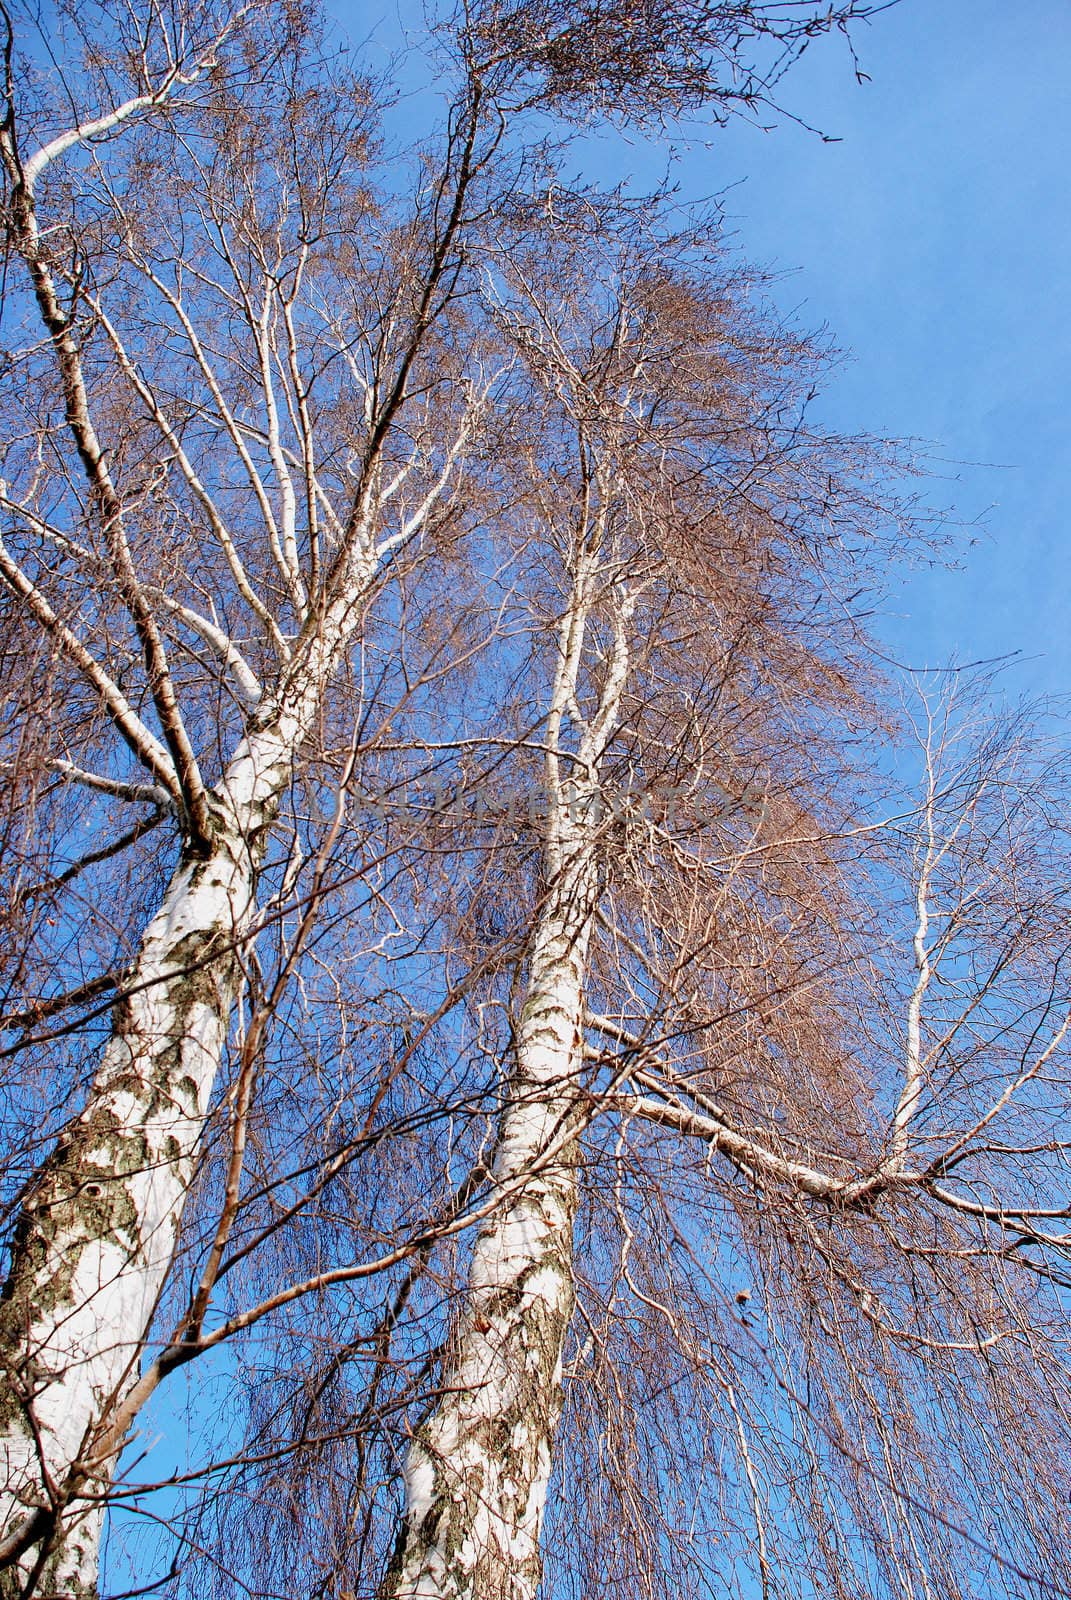 Two birches without leaves in late autumn